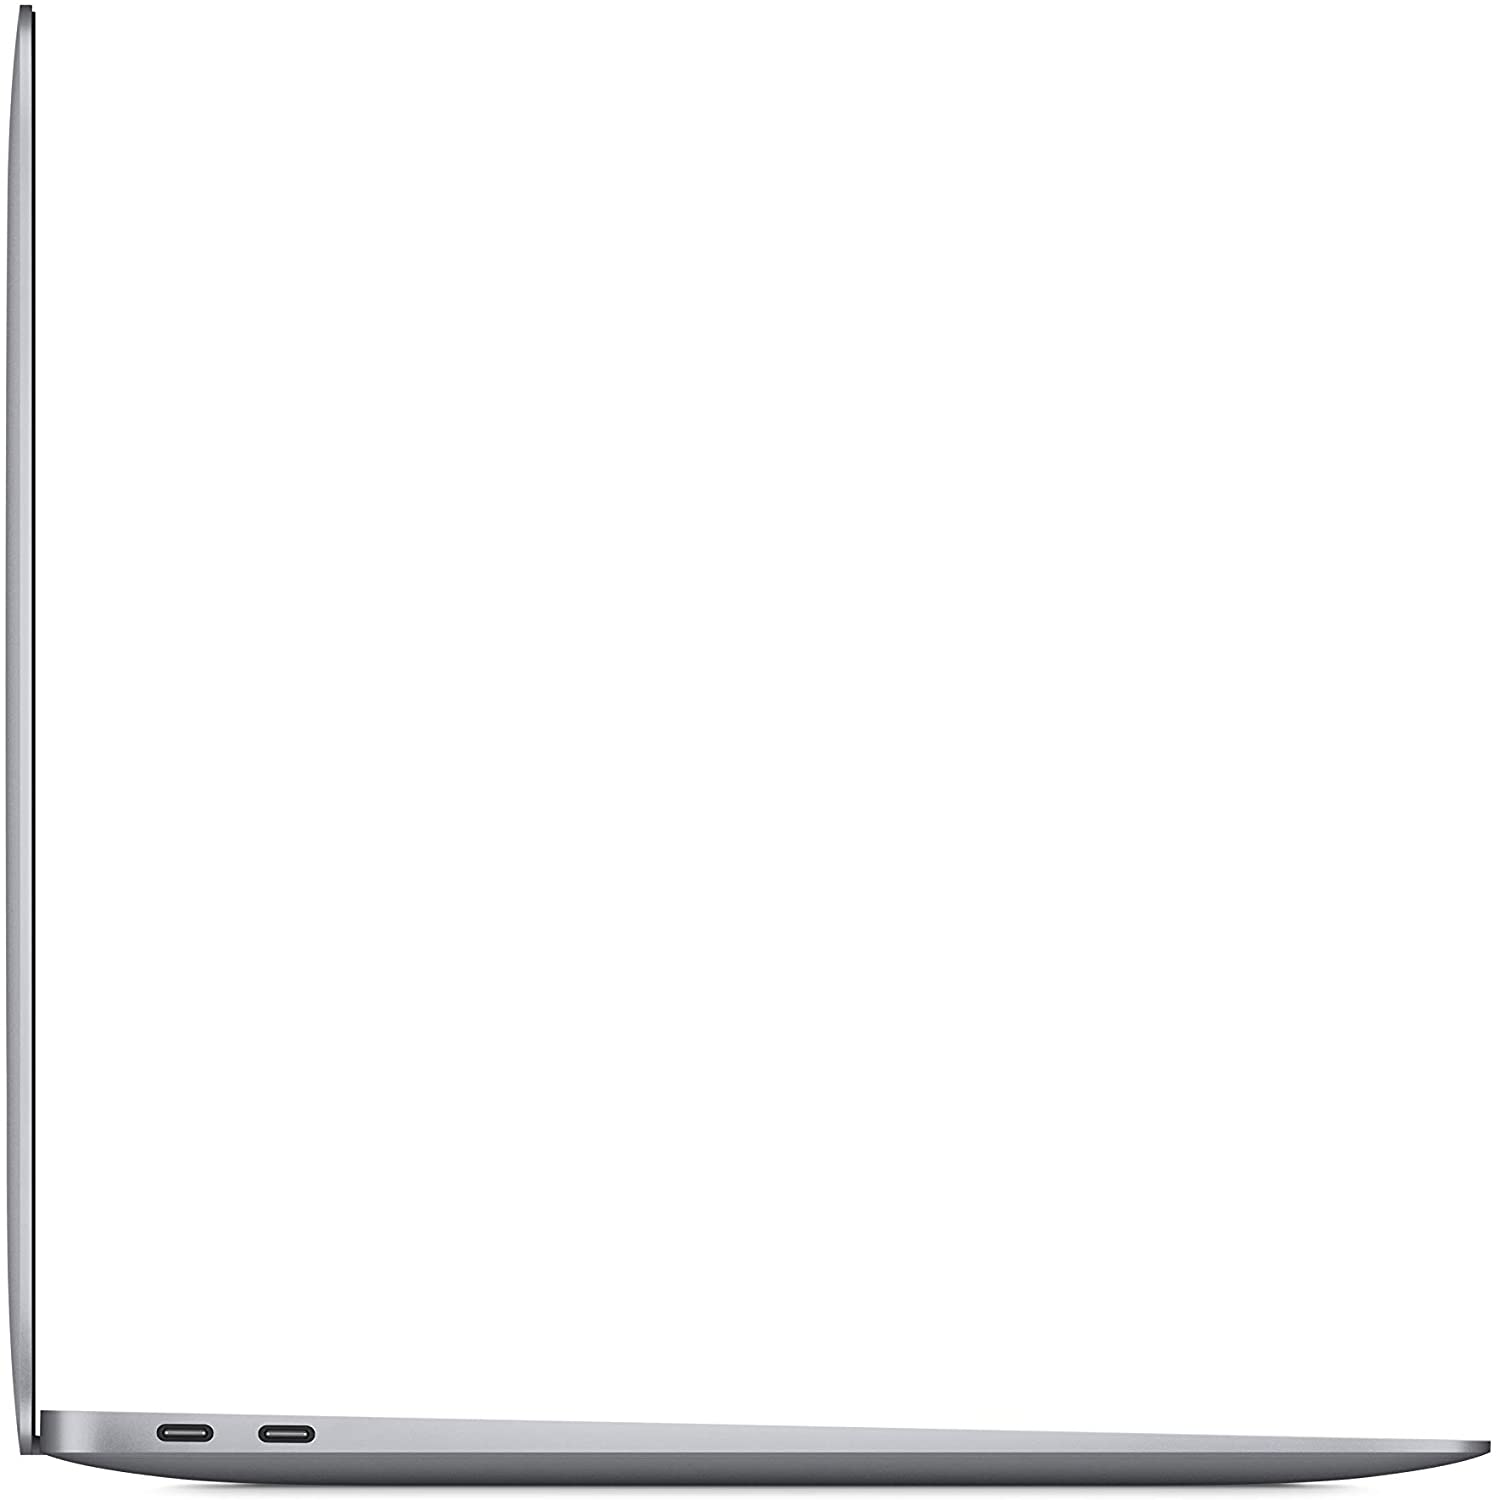 New Apple MacBook Air with Apple M1 Chip (13-inch, 8GB RAM, 256GB SSD) - Space Grey (Latest Model